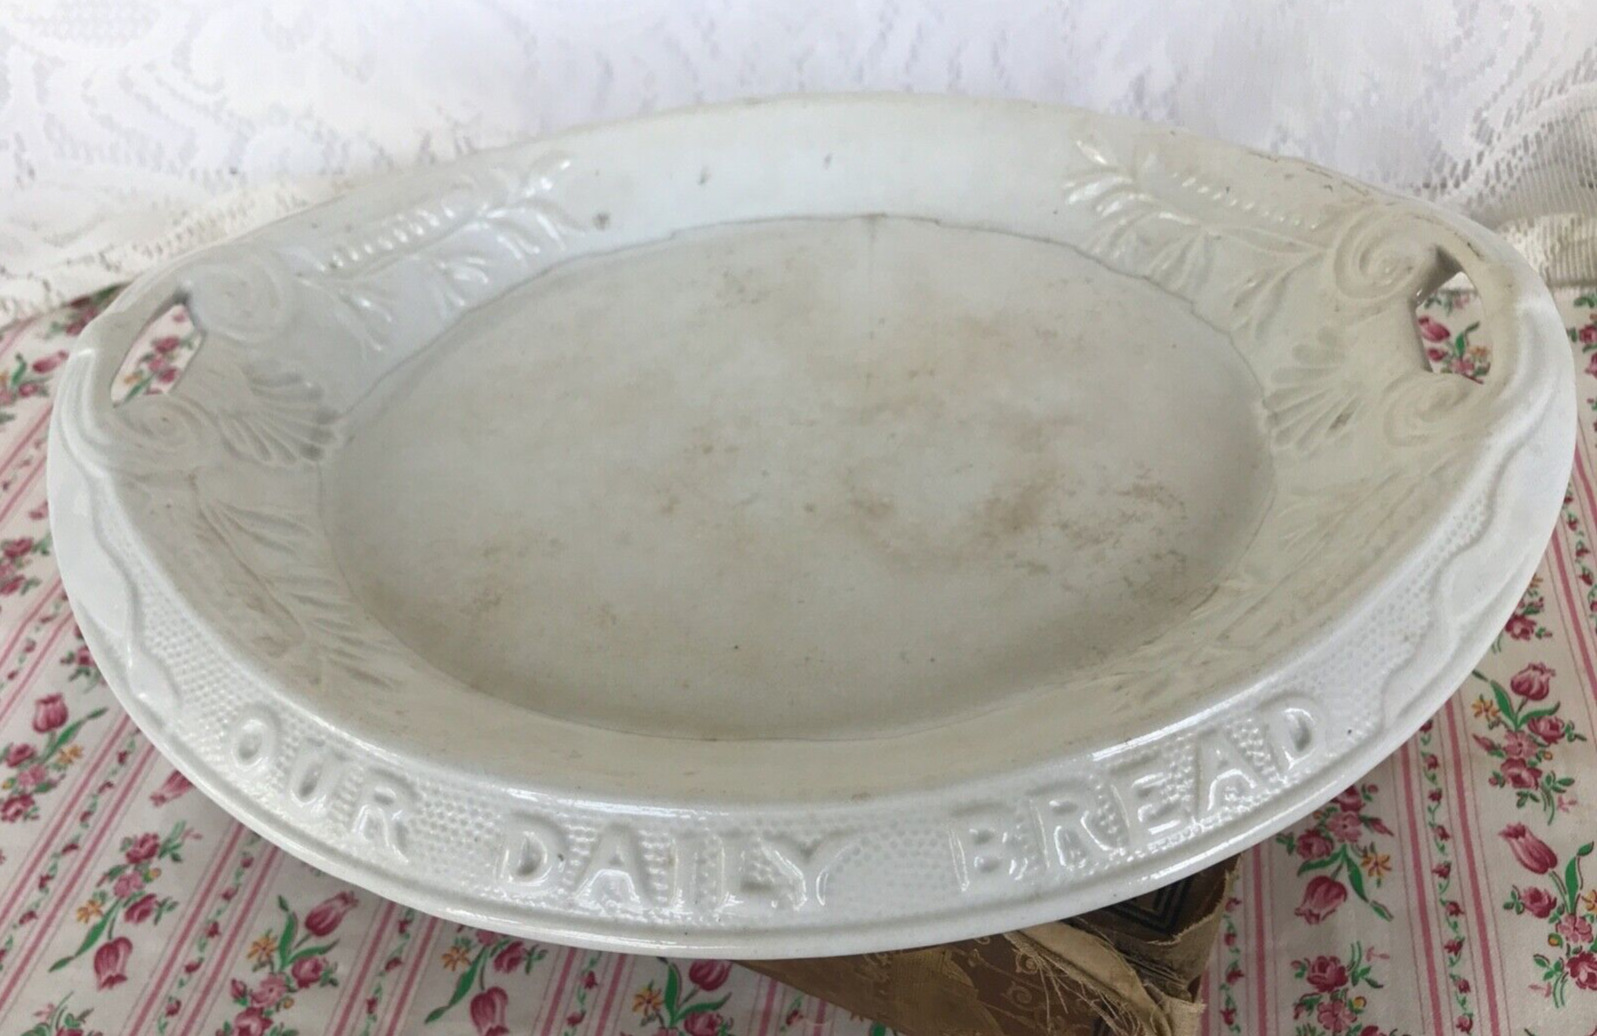 Antique White Ironstone Bread Platter Give Us This Day SR Co Crazing Cracking